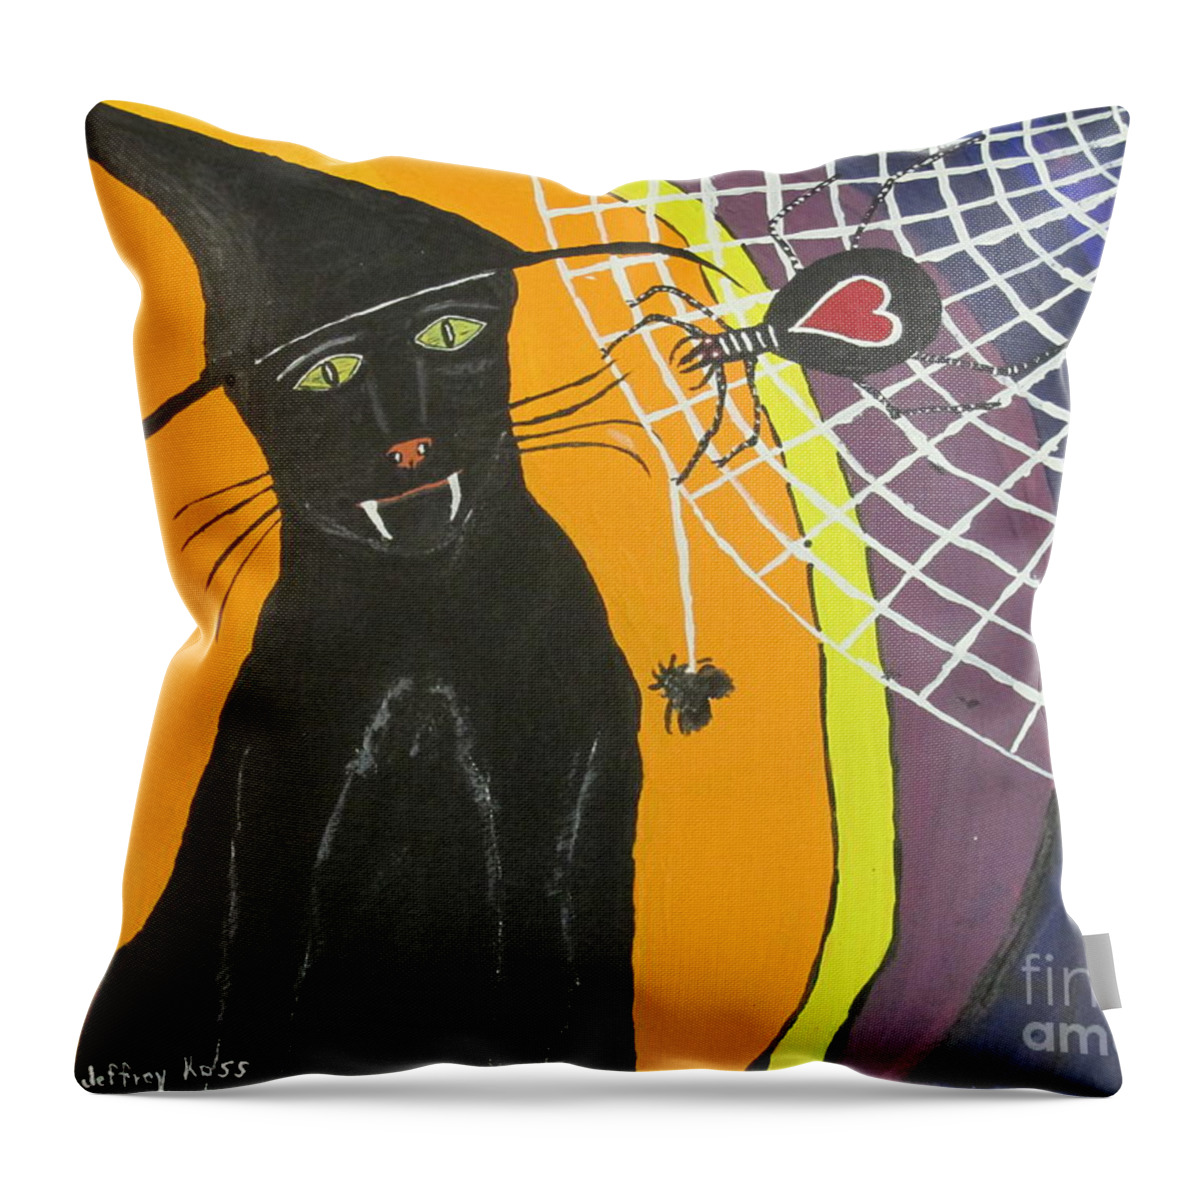 Cat Throw Pillow featuring the painting Black Cat In A Hat by Jeffrey Koss